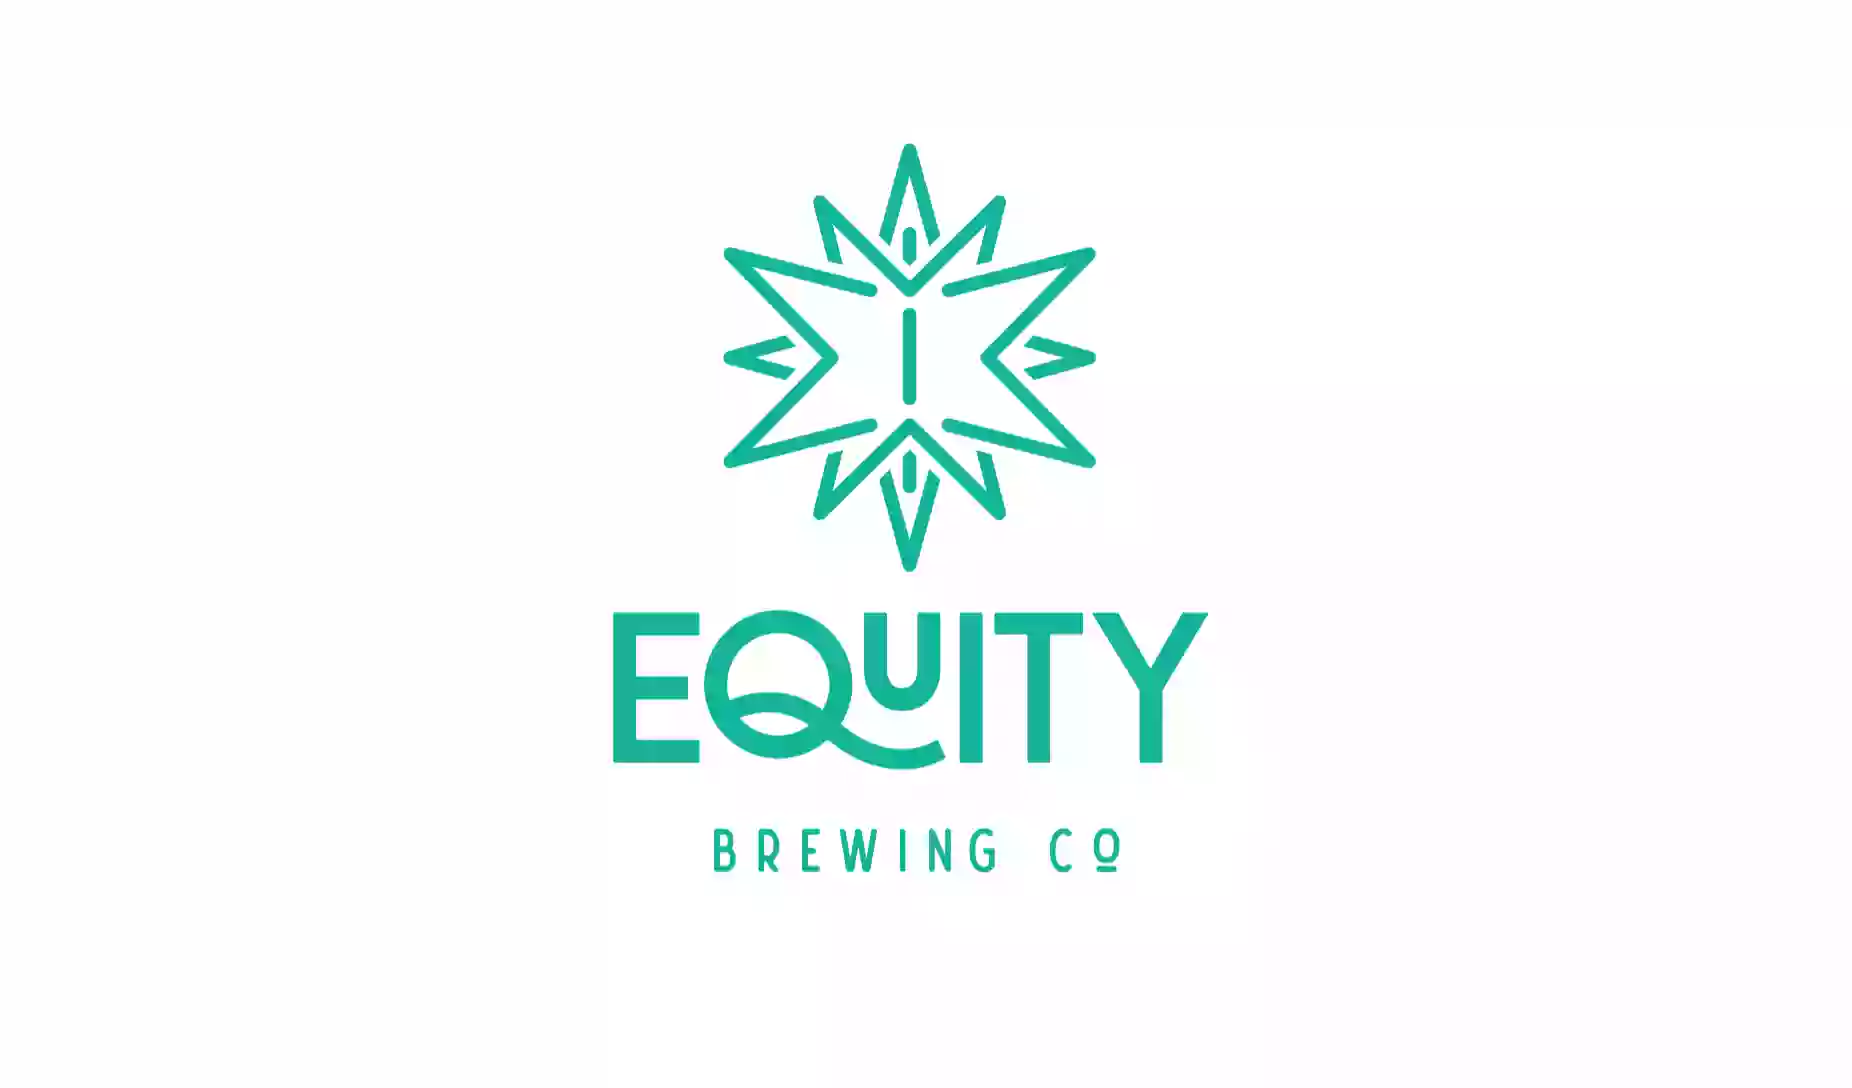 Equity Brewing Company